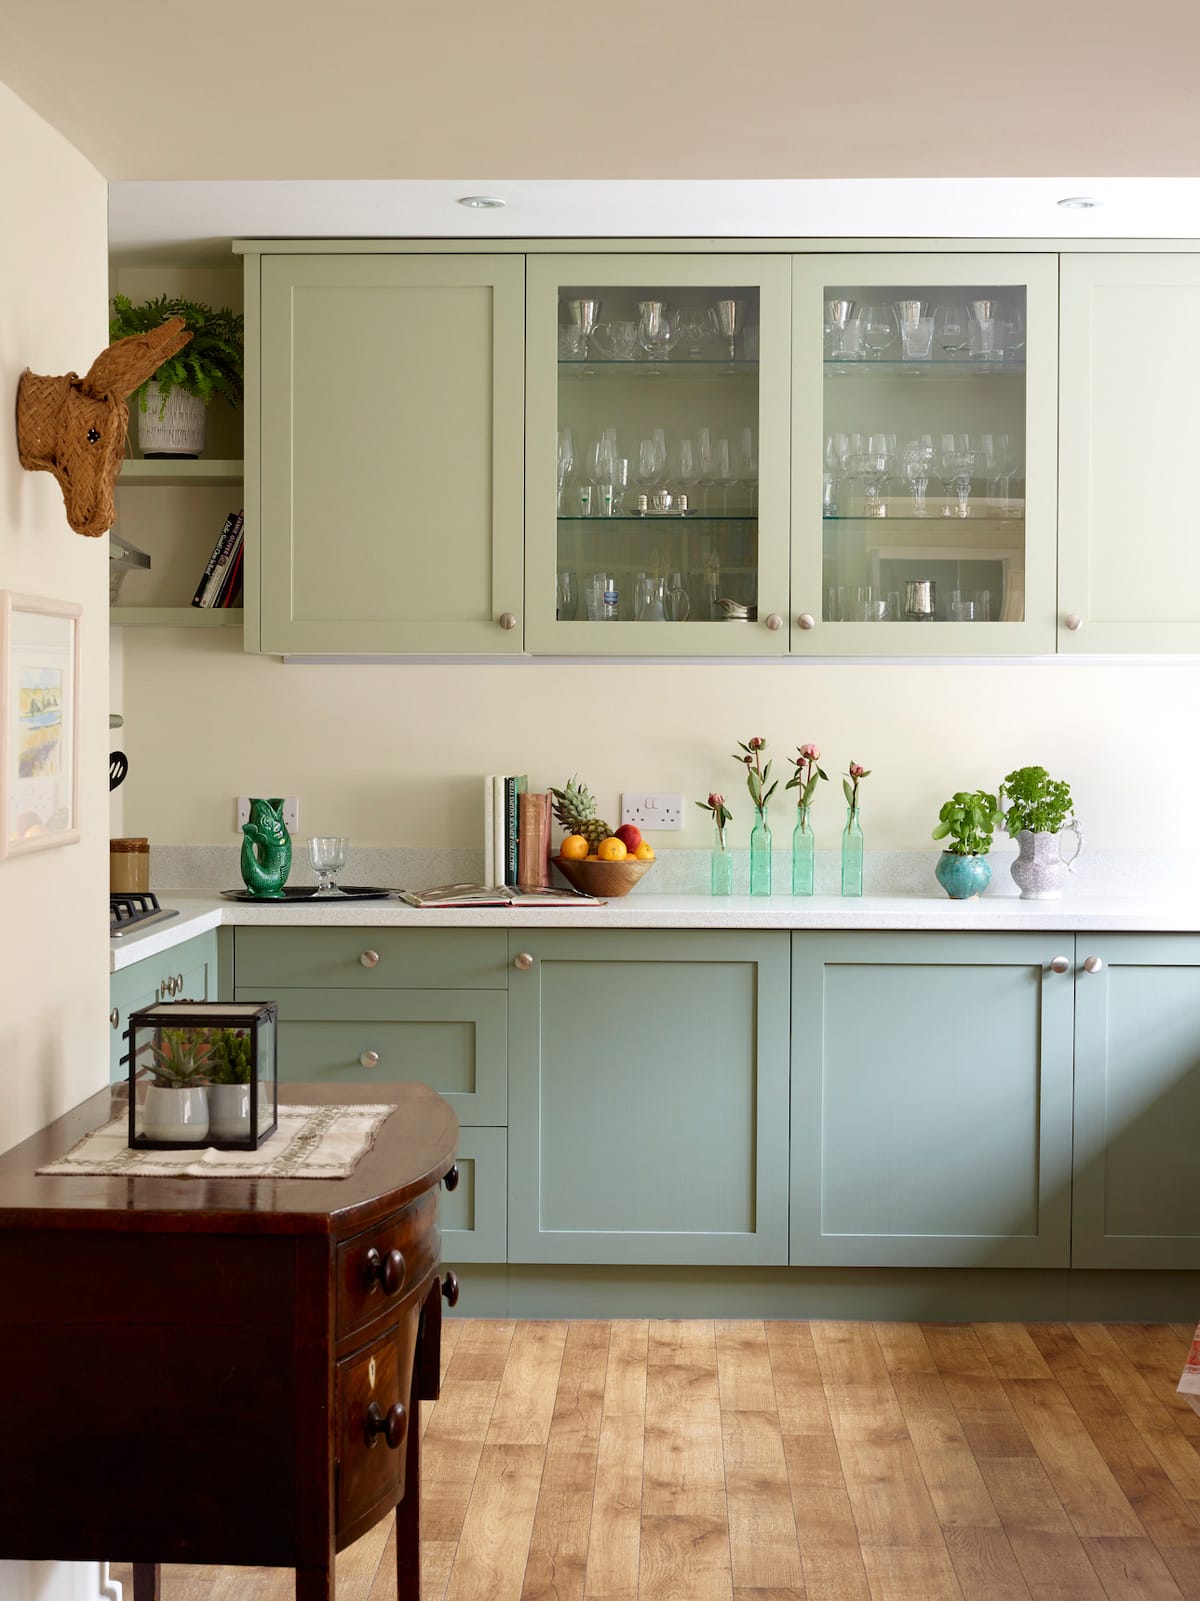 Our Favorite Green Paint Colors - Christopher Scott Cabinetry